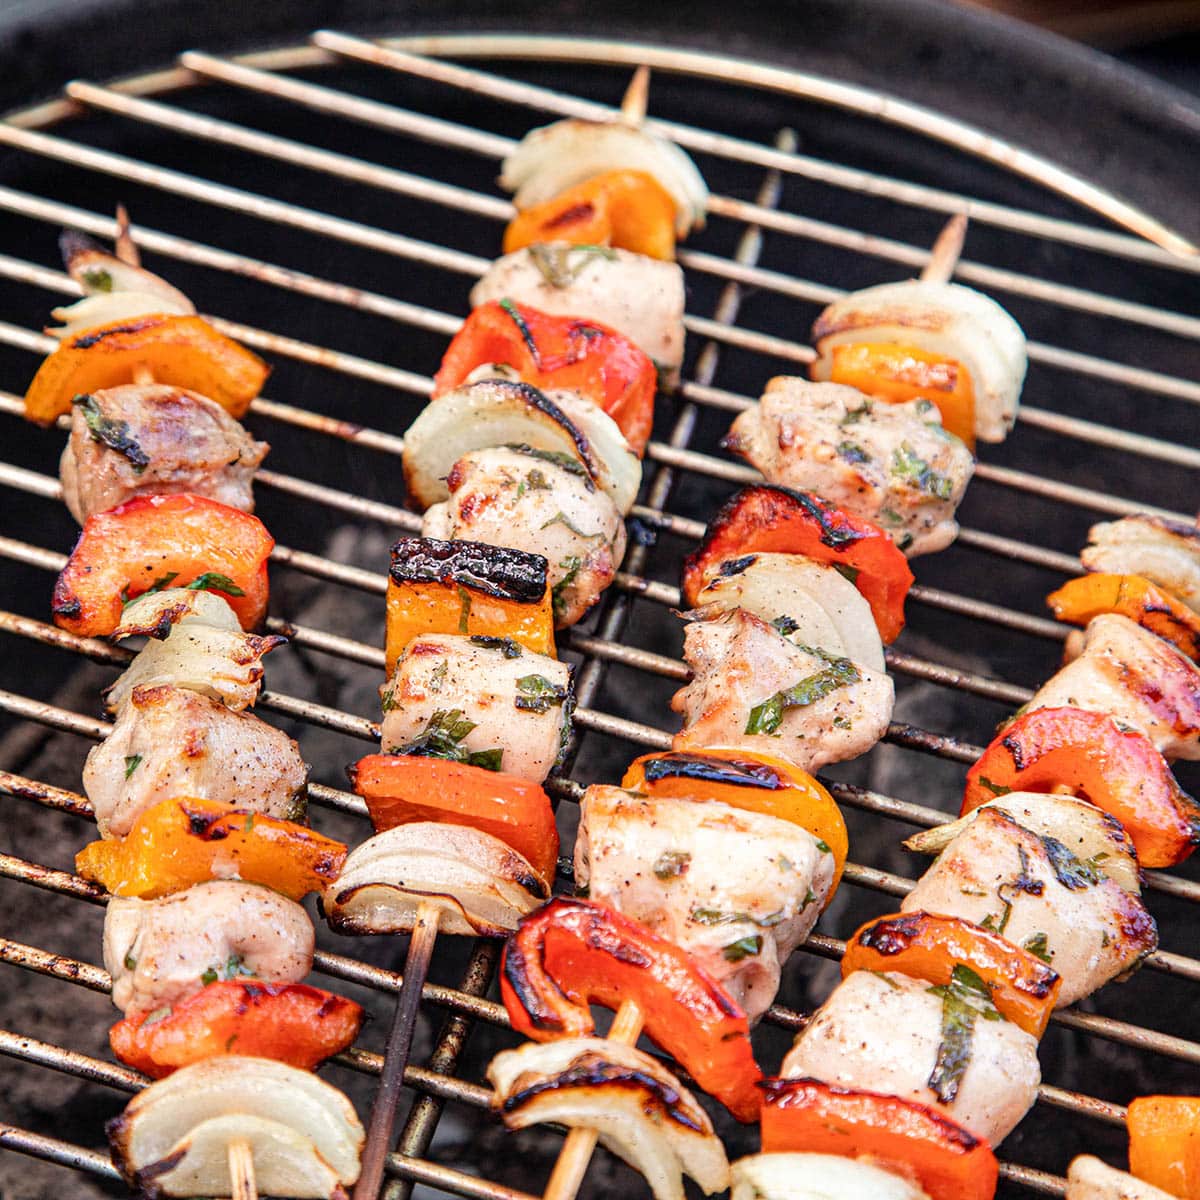 Wooden skewers on a grill with chicken, peppers, and onion.